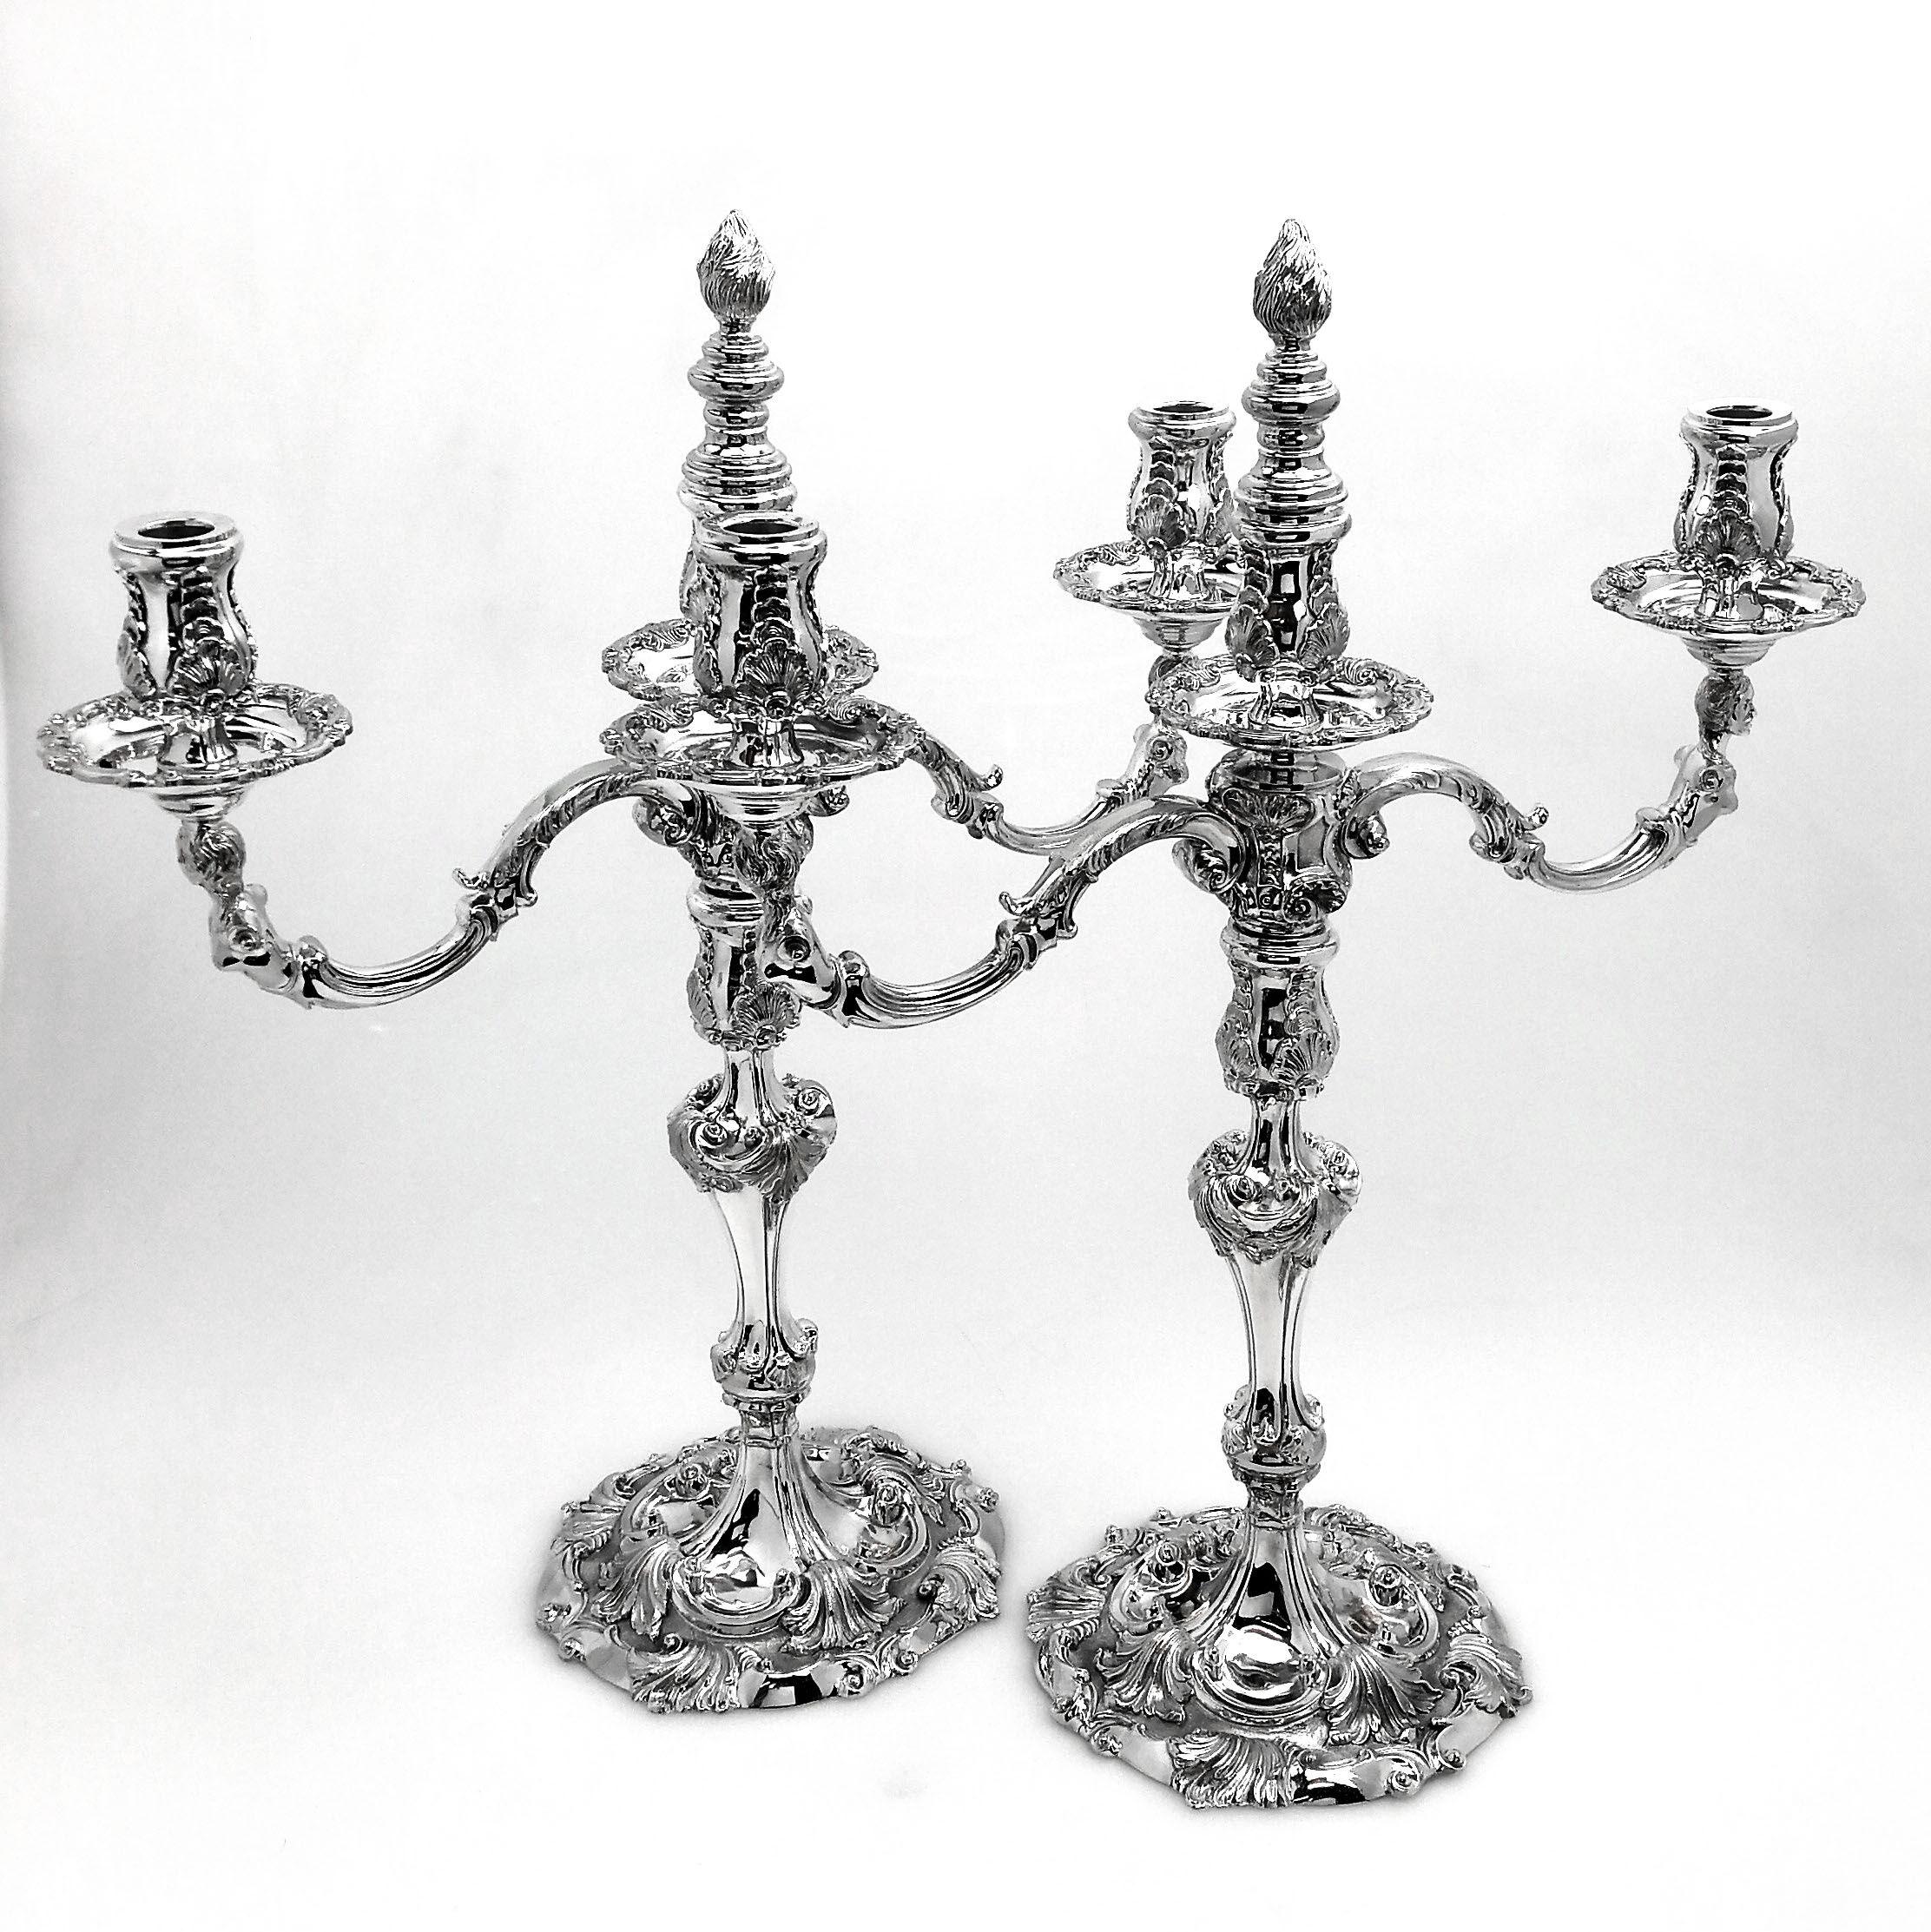 A magnificent pair of Tiffany & Co. sterling Silver three-light Candelabra that convert into two-light Candelabra and into single Candlesticks. These Candelabra are inspired by the original Georgian Designed candelabra by Kirby, Kirby, Waterhouse,